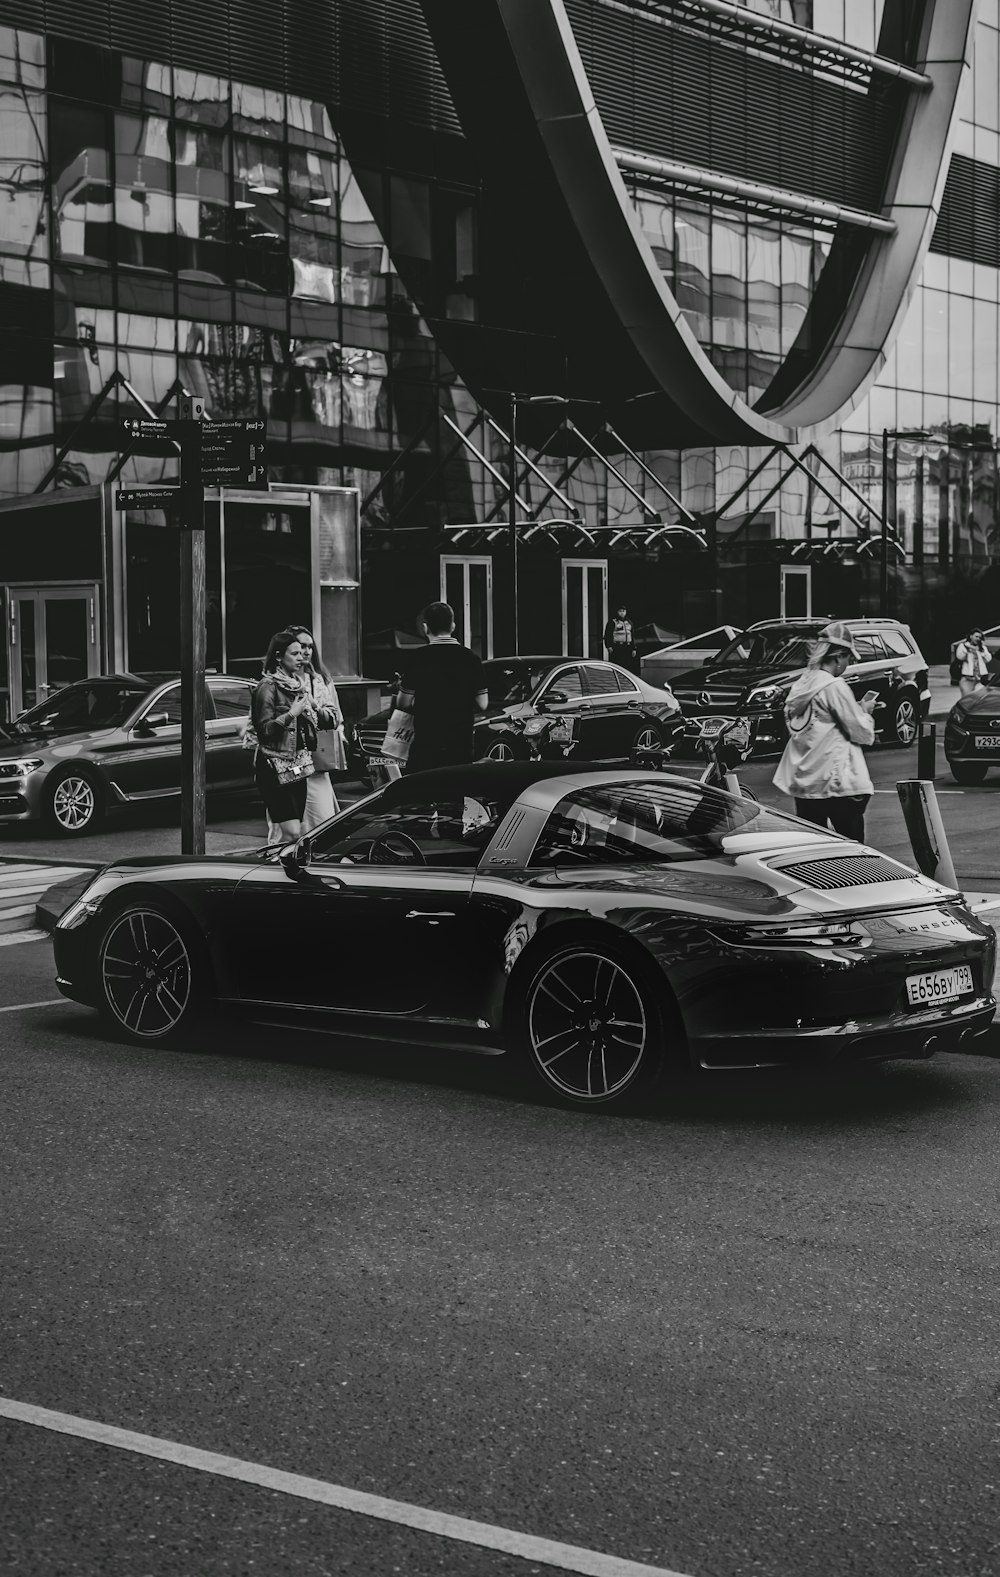 grayscale photo of man and woman riding on black convertible car